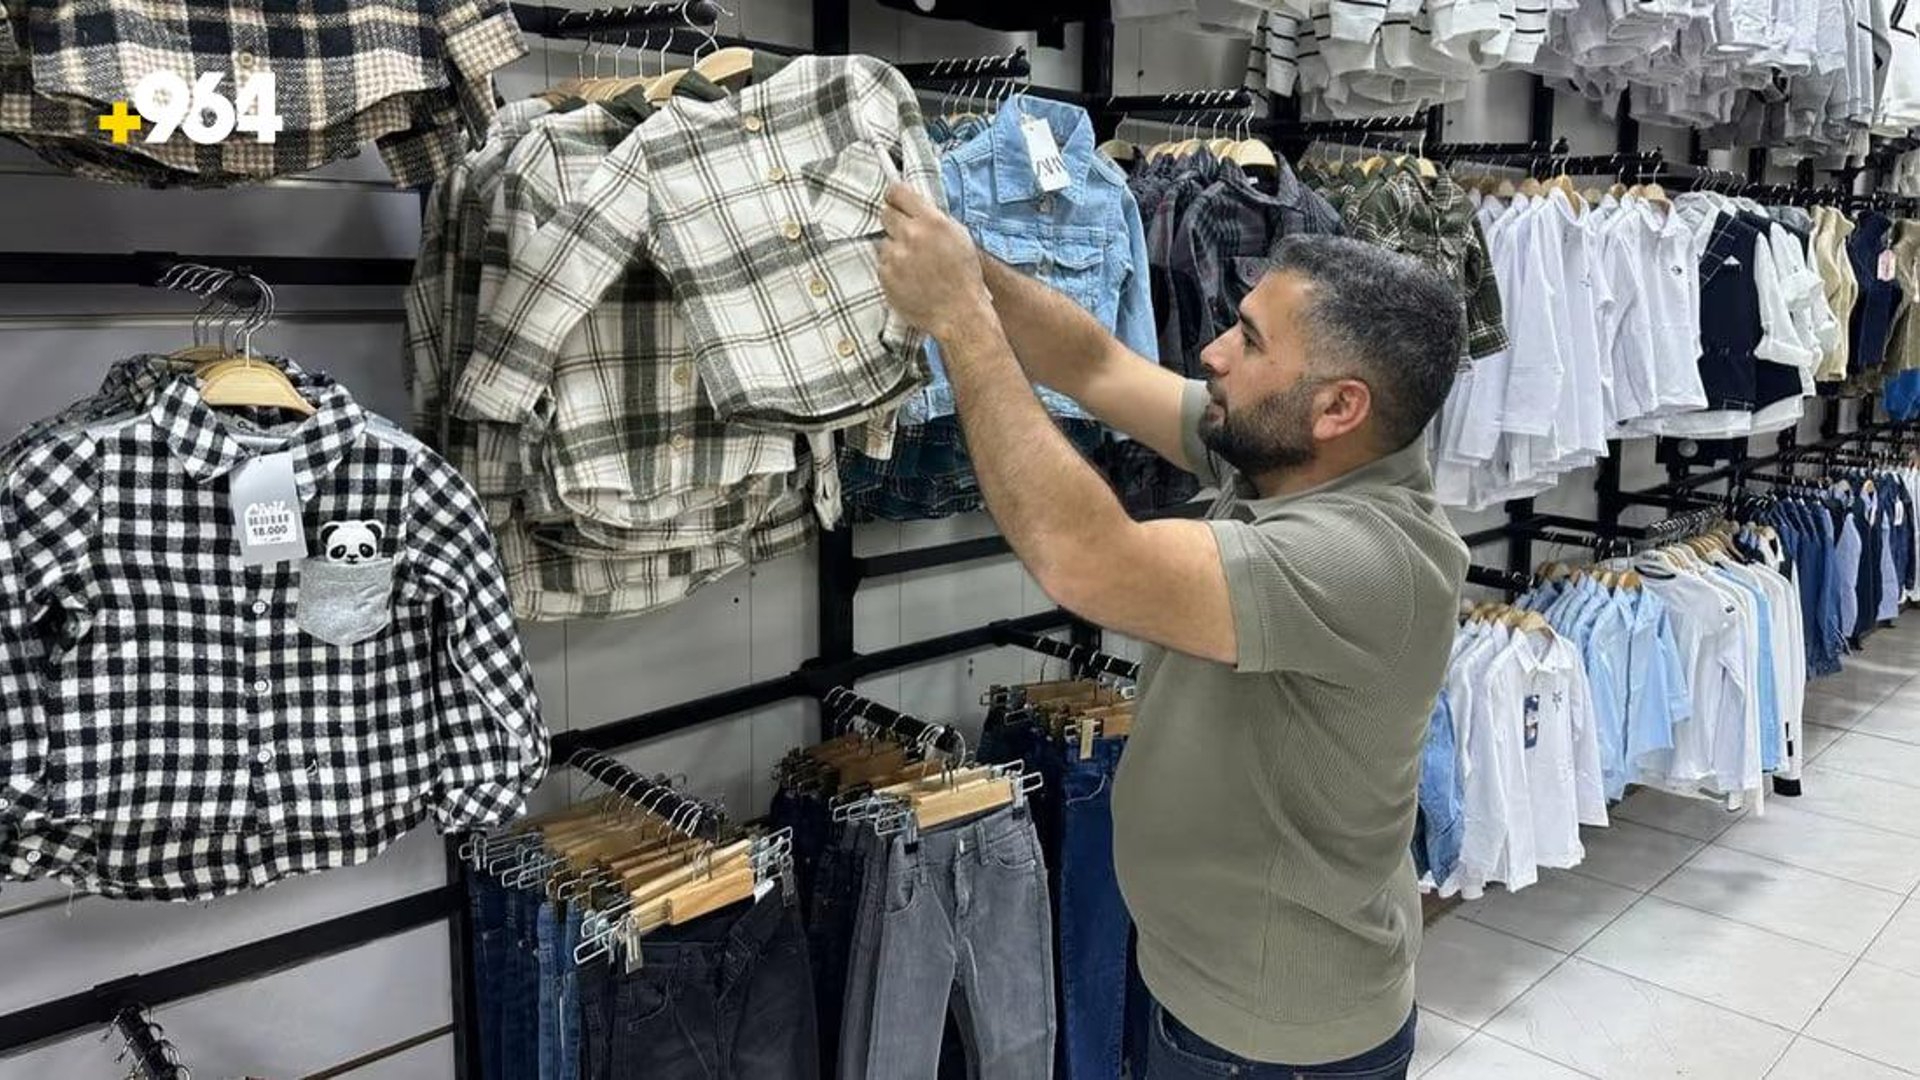 Fall clothing season begins in Kut amidst rising prices